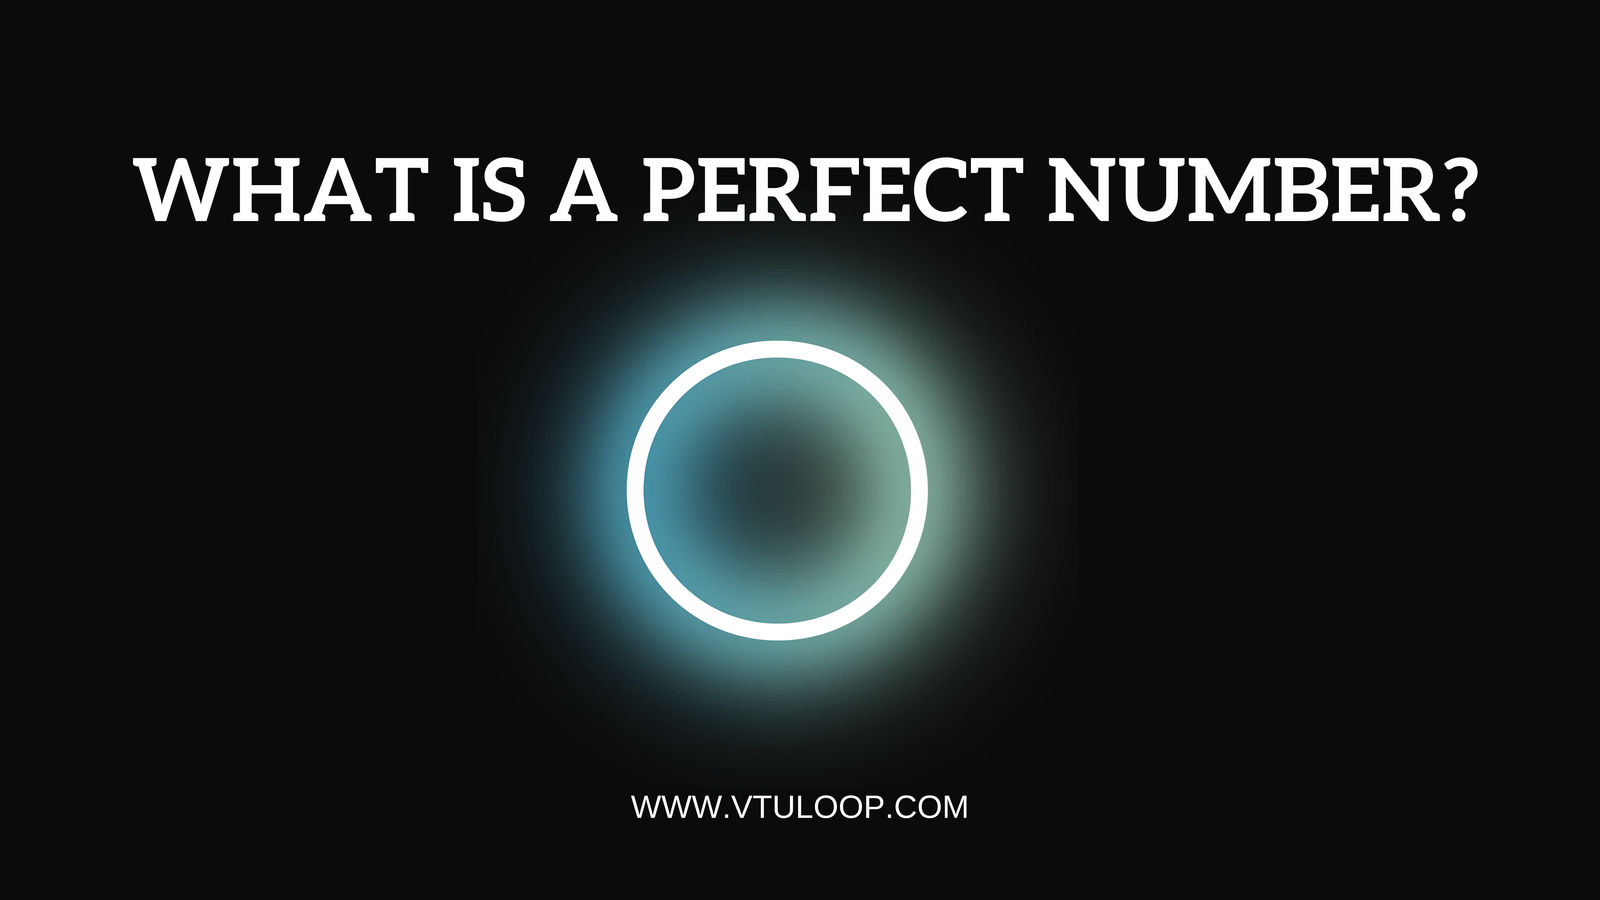 What is perfect number